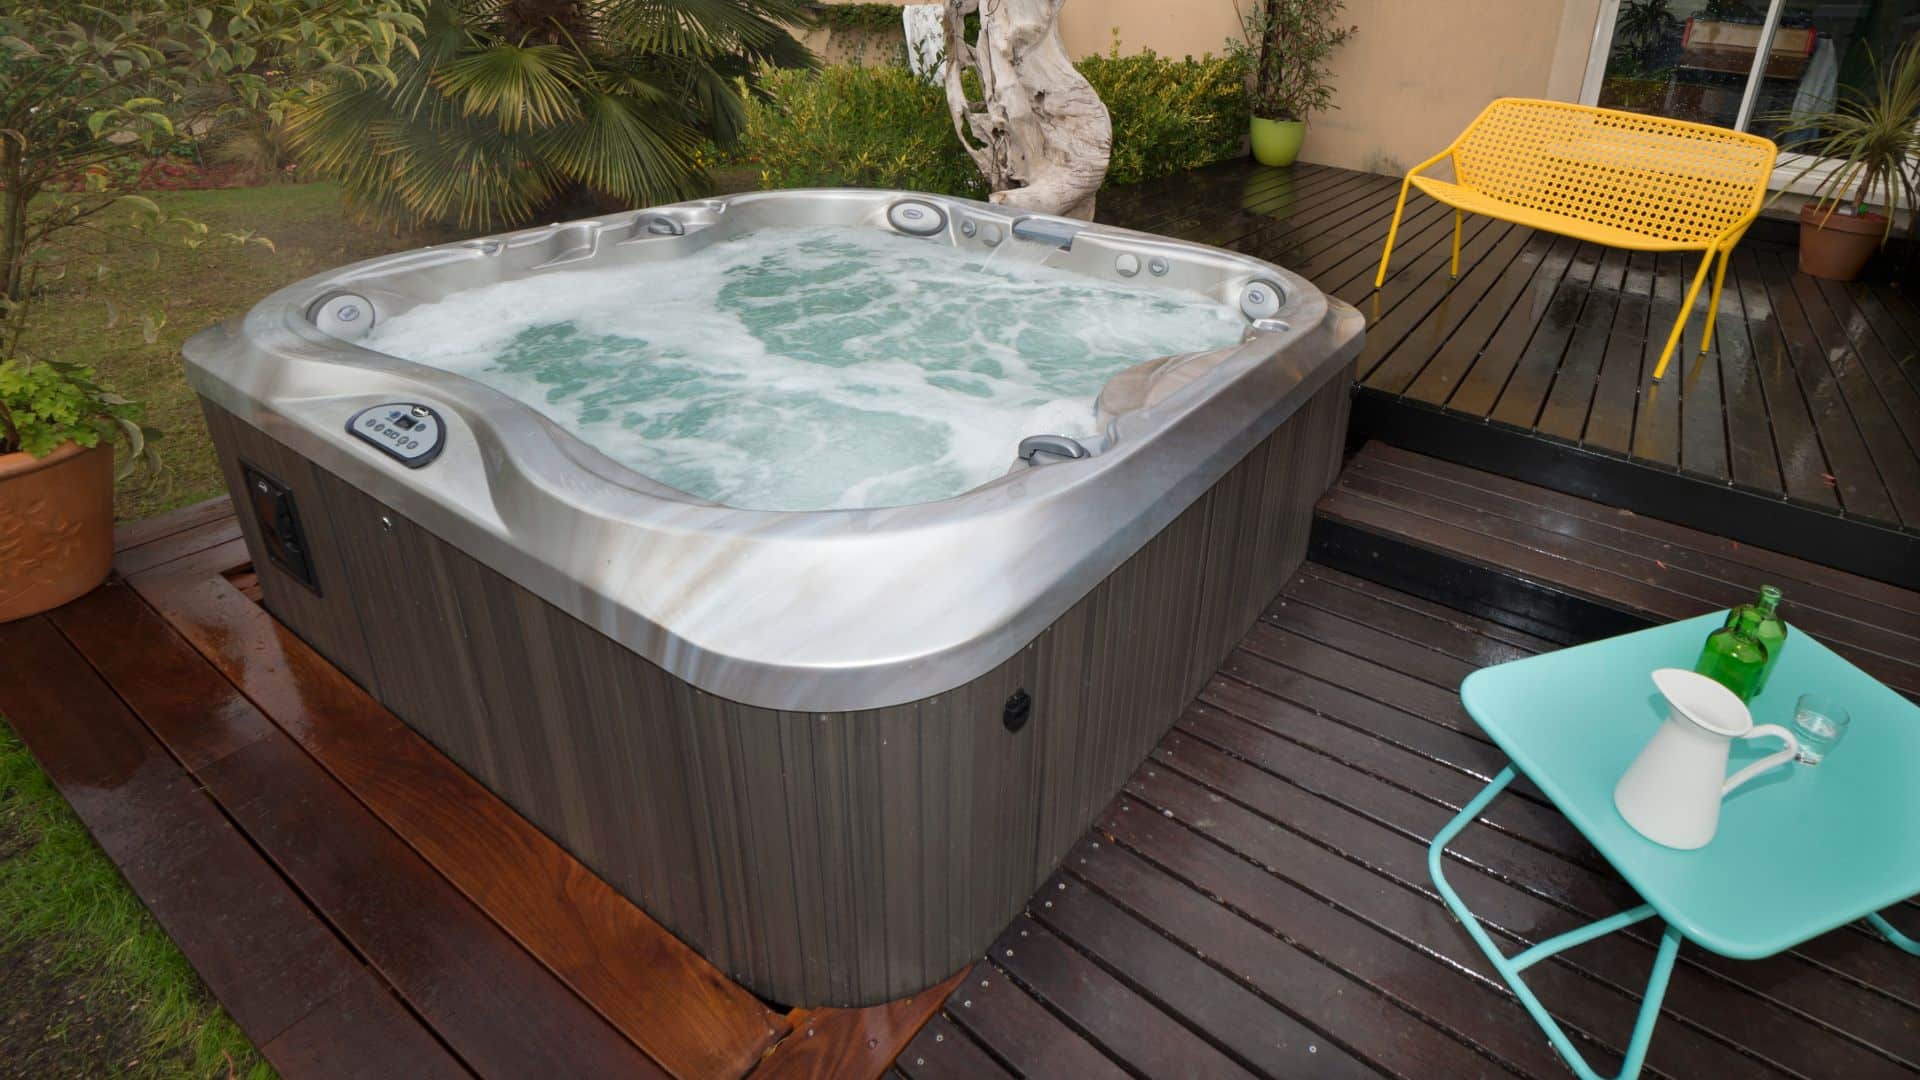 How To Stop Hot Tub Foaming